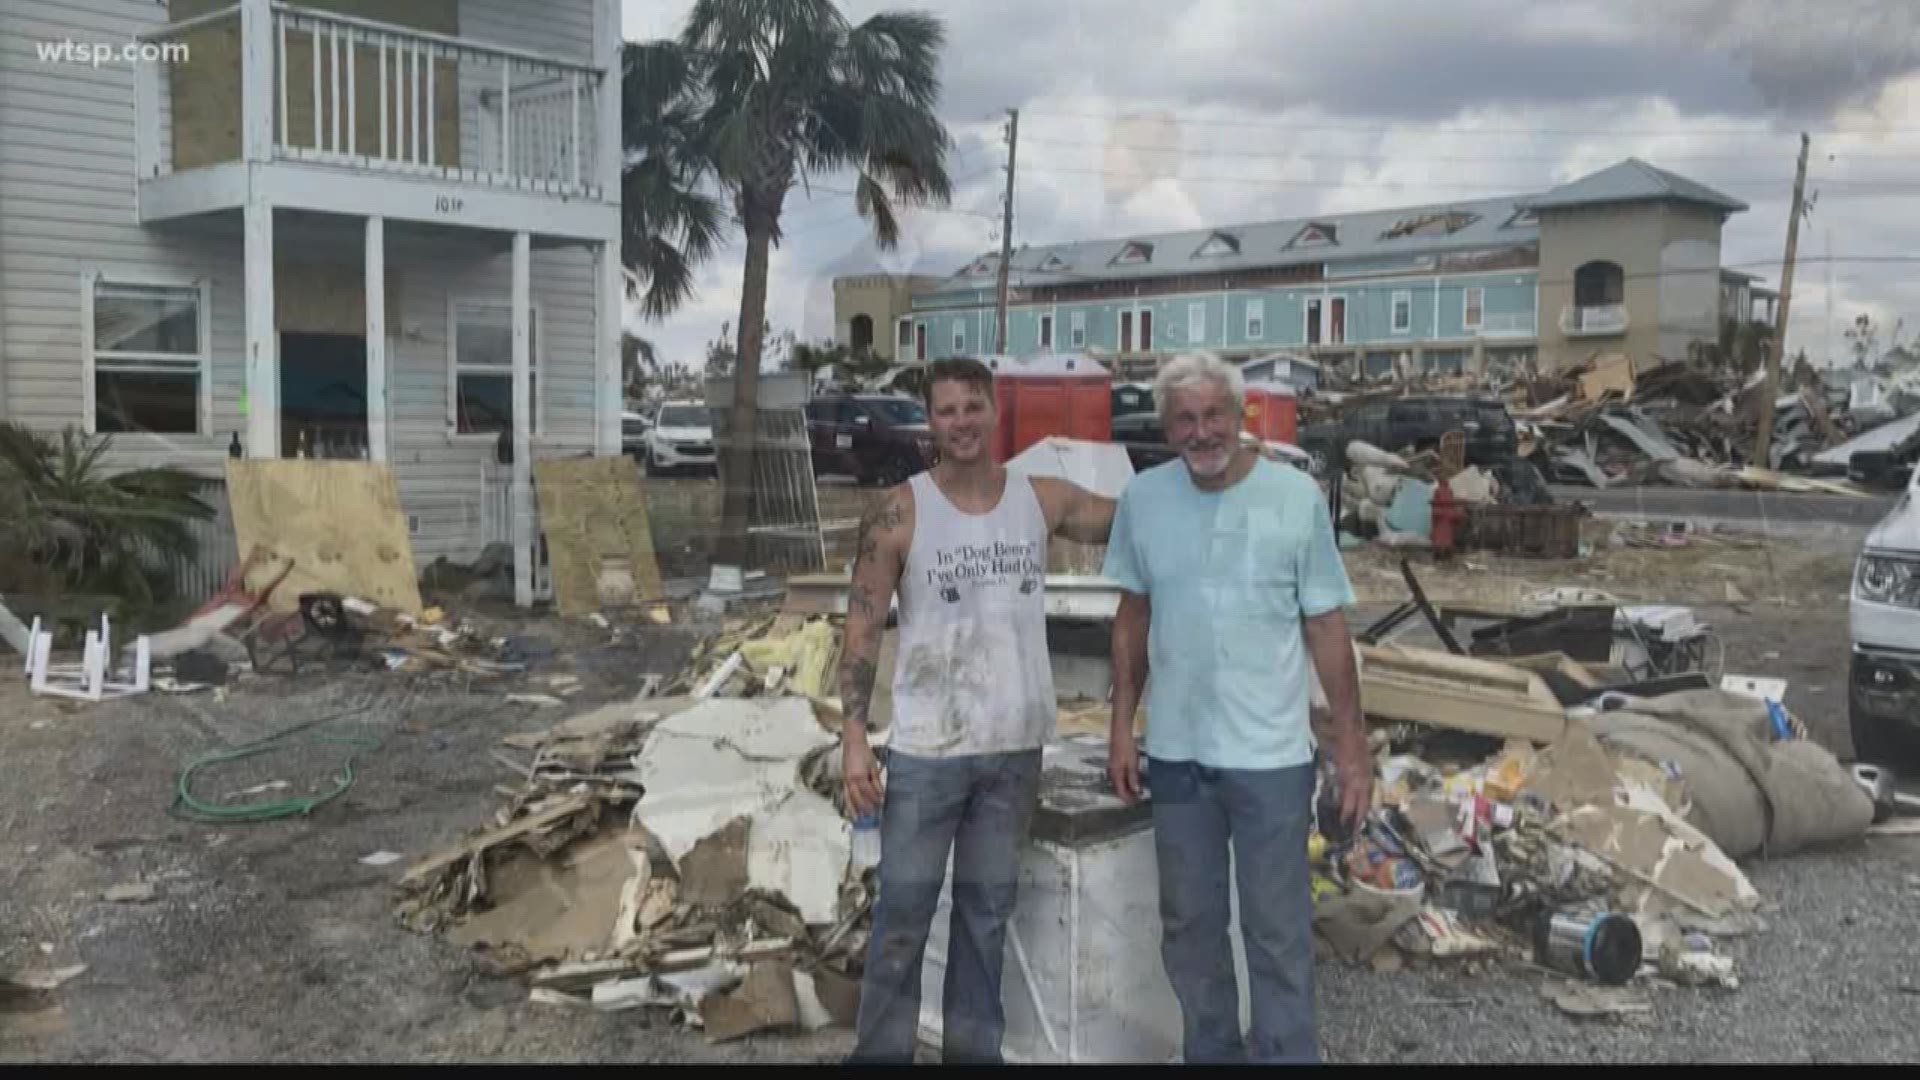 Residents are having to decide whether to try to rebuild or to give up their hopes of home.